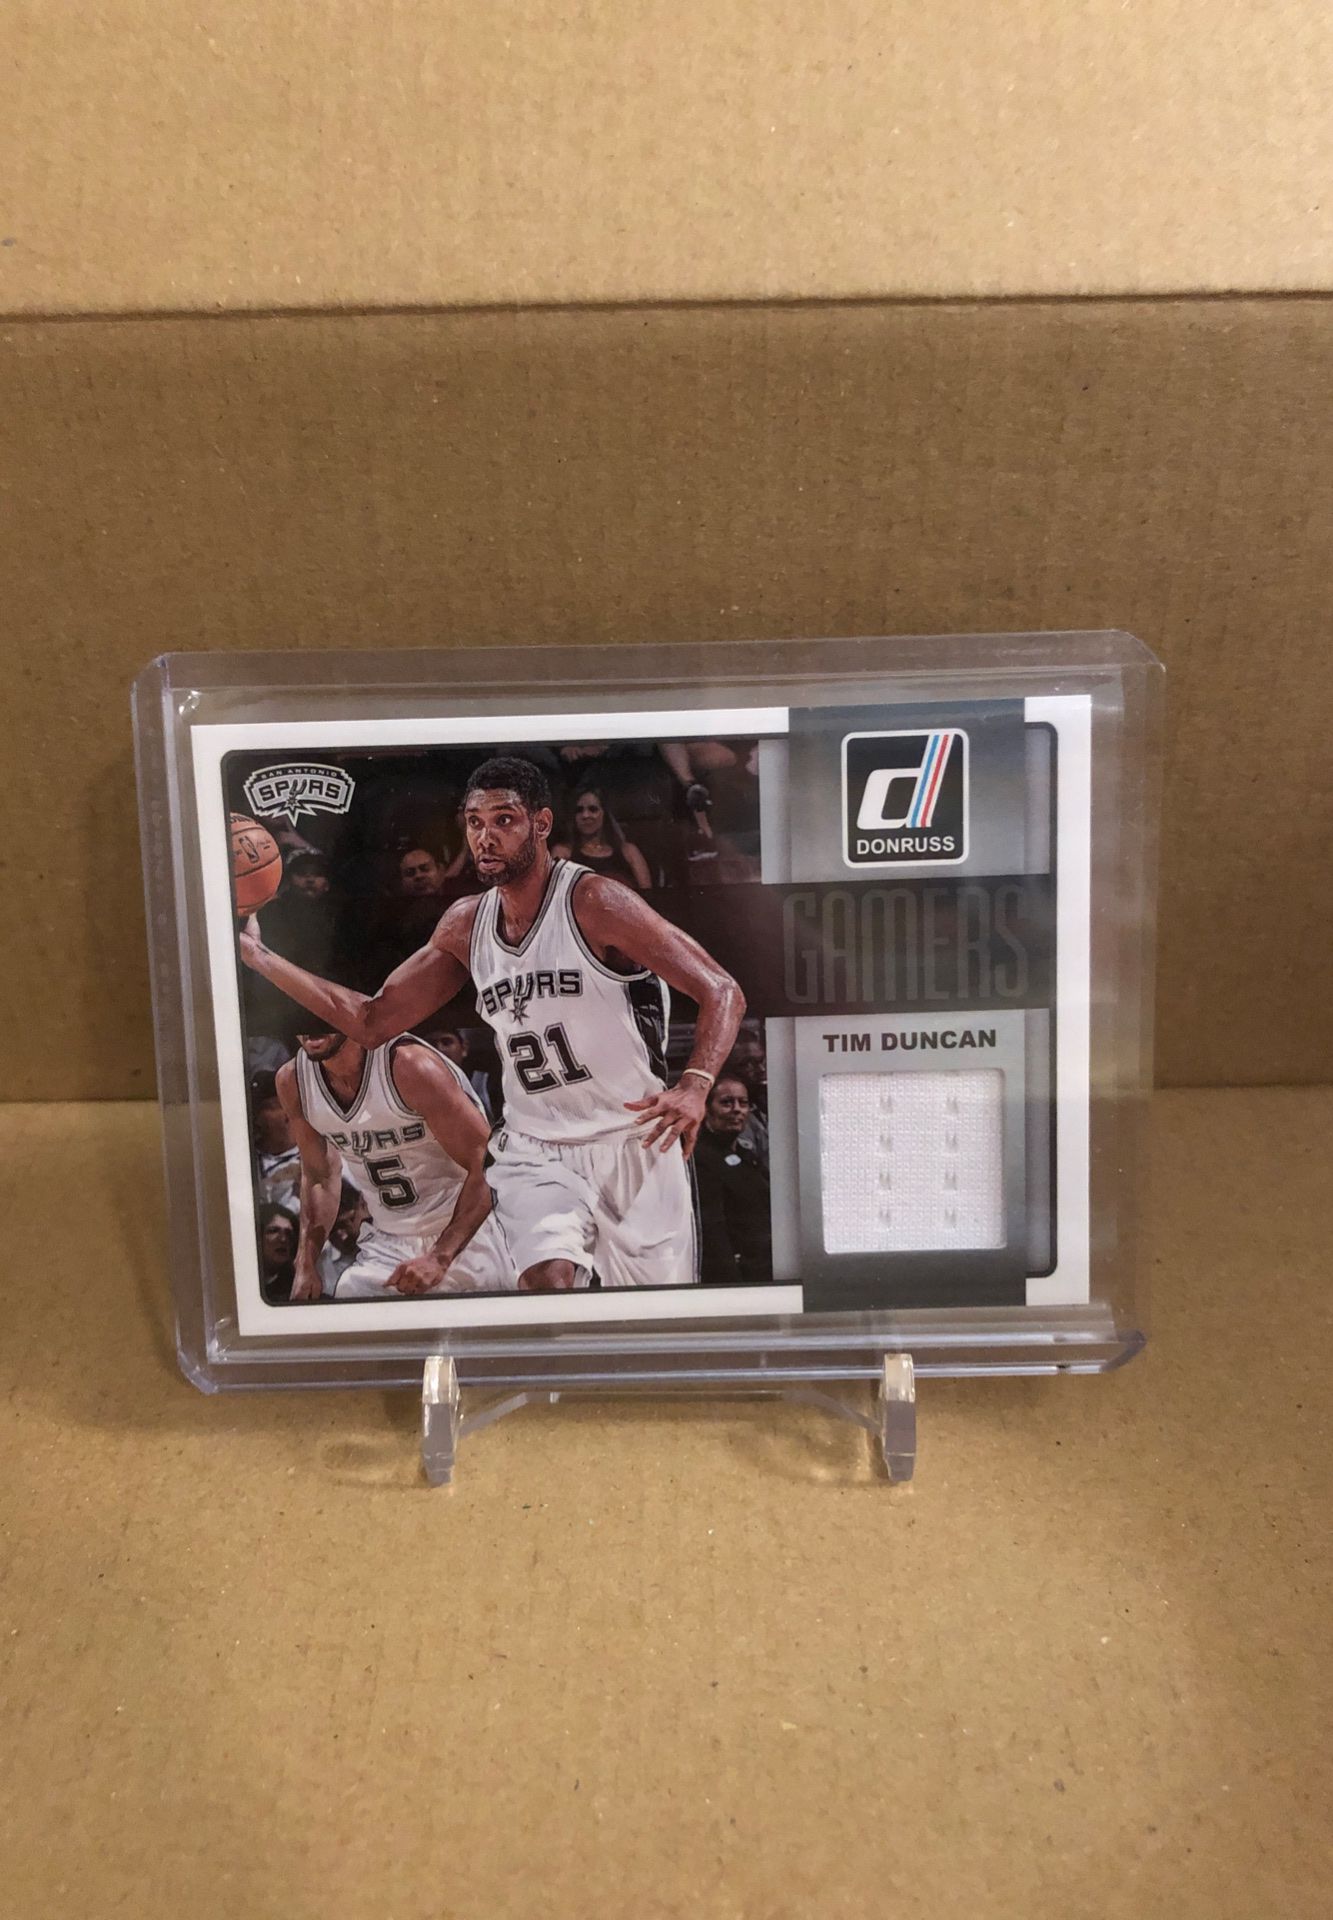 Tim Duncan game used jersey relic basketball card